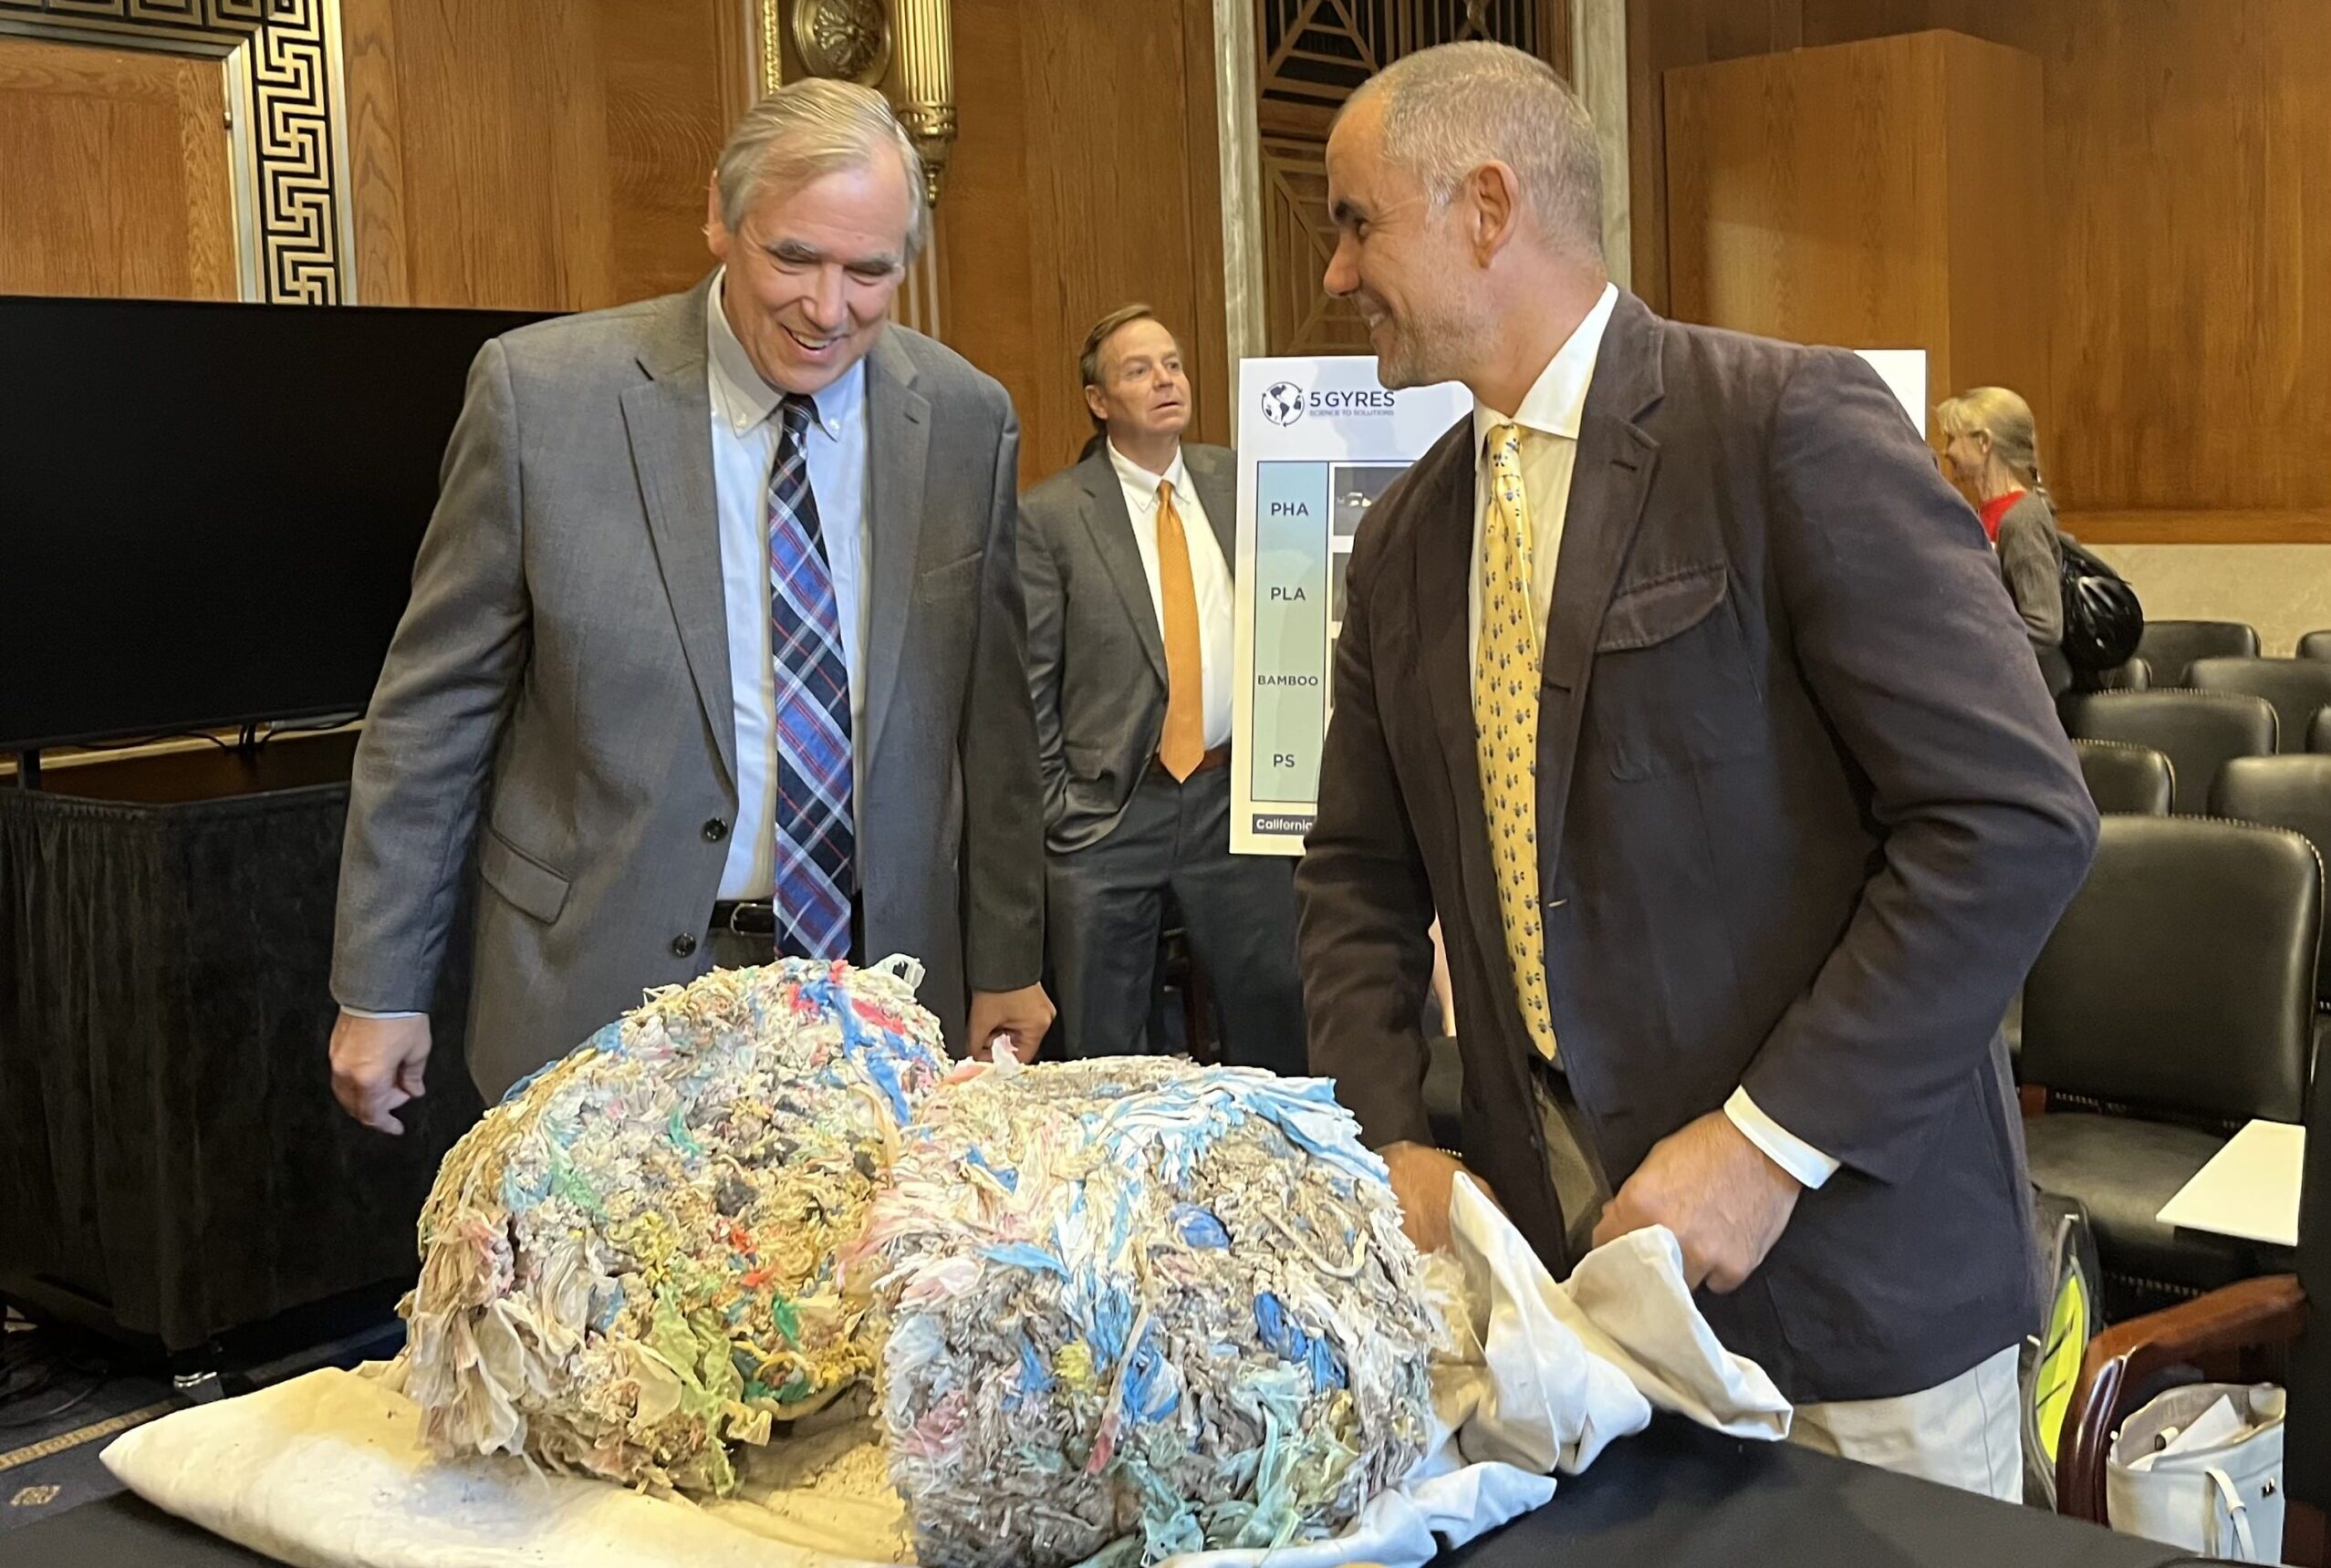 Sen. Jeff Merkley (D-Ore.), left, and witness Marcus Eriksen, right, discuss the plastic mass Eriksen brought to the hearing which he found in one camel.